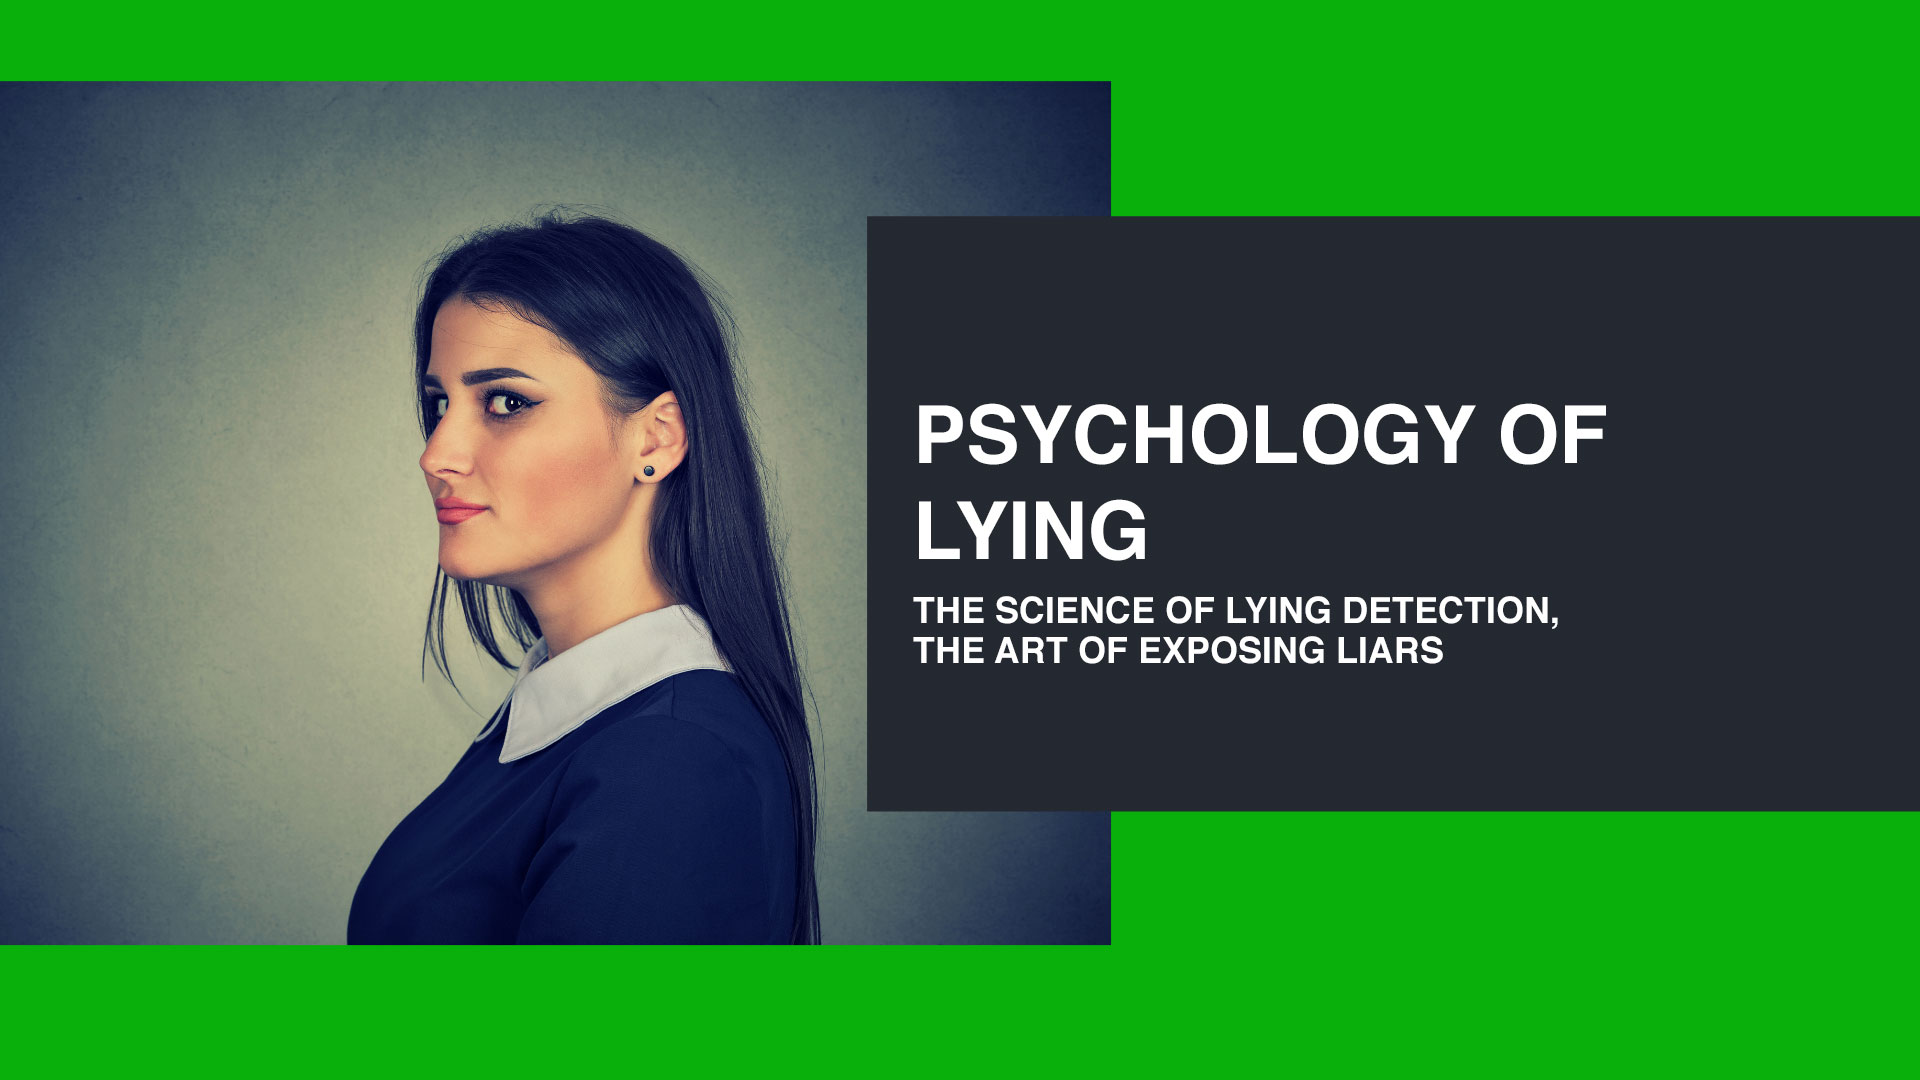 Psychology of lying - The science of lying detection, the art of exposing liars